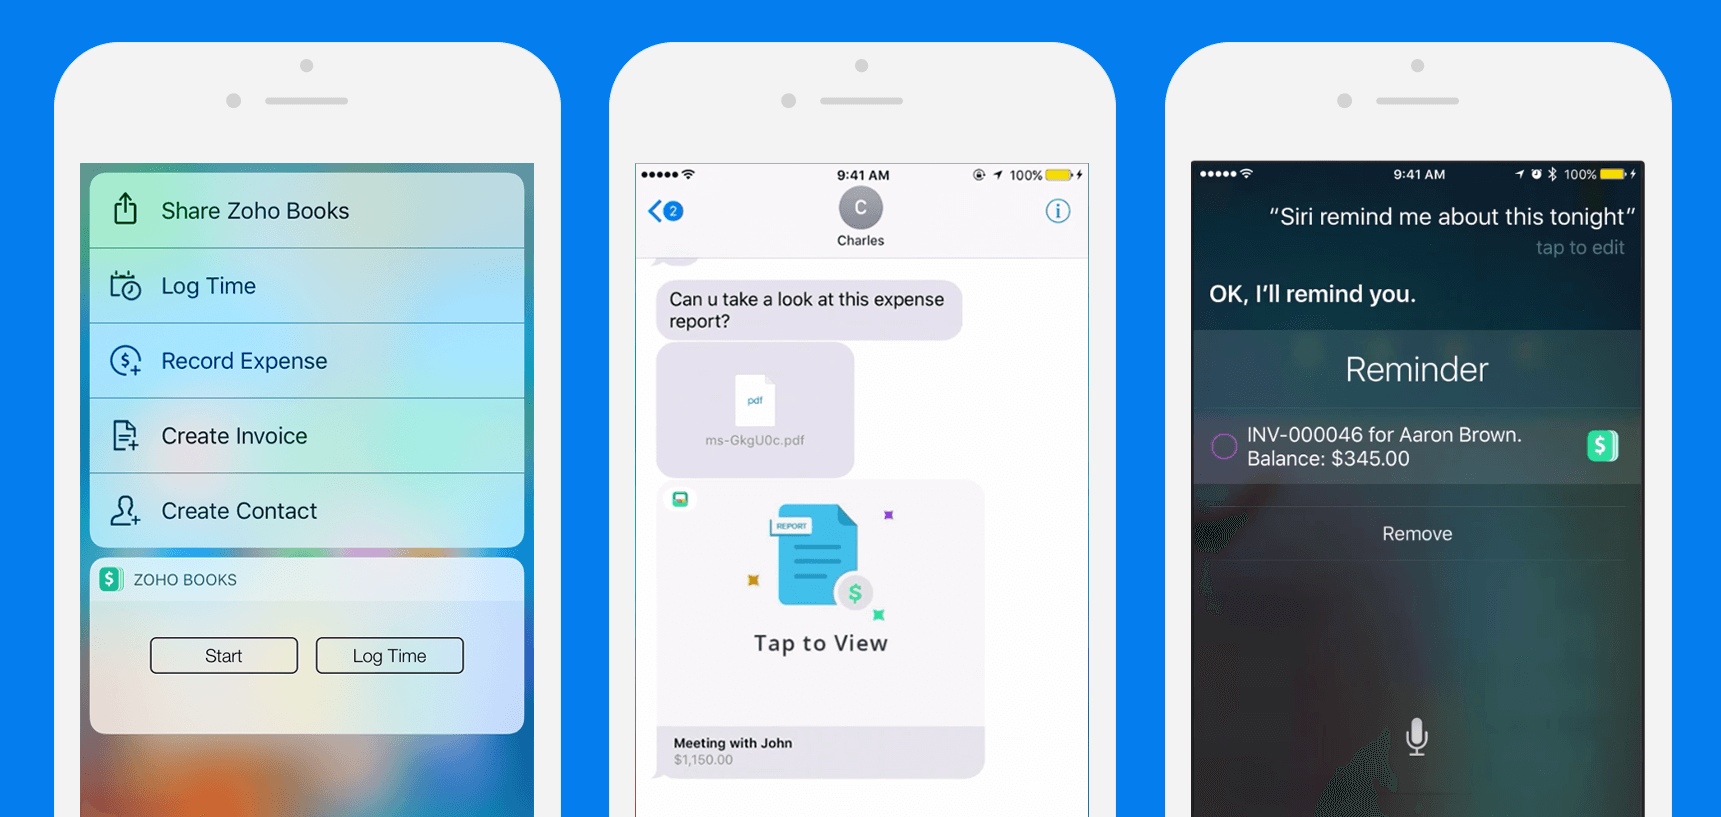 Finance, meet iMessage. Payments, approvals, and reminders, all through iOS 10.